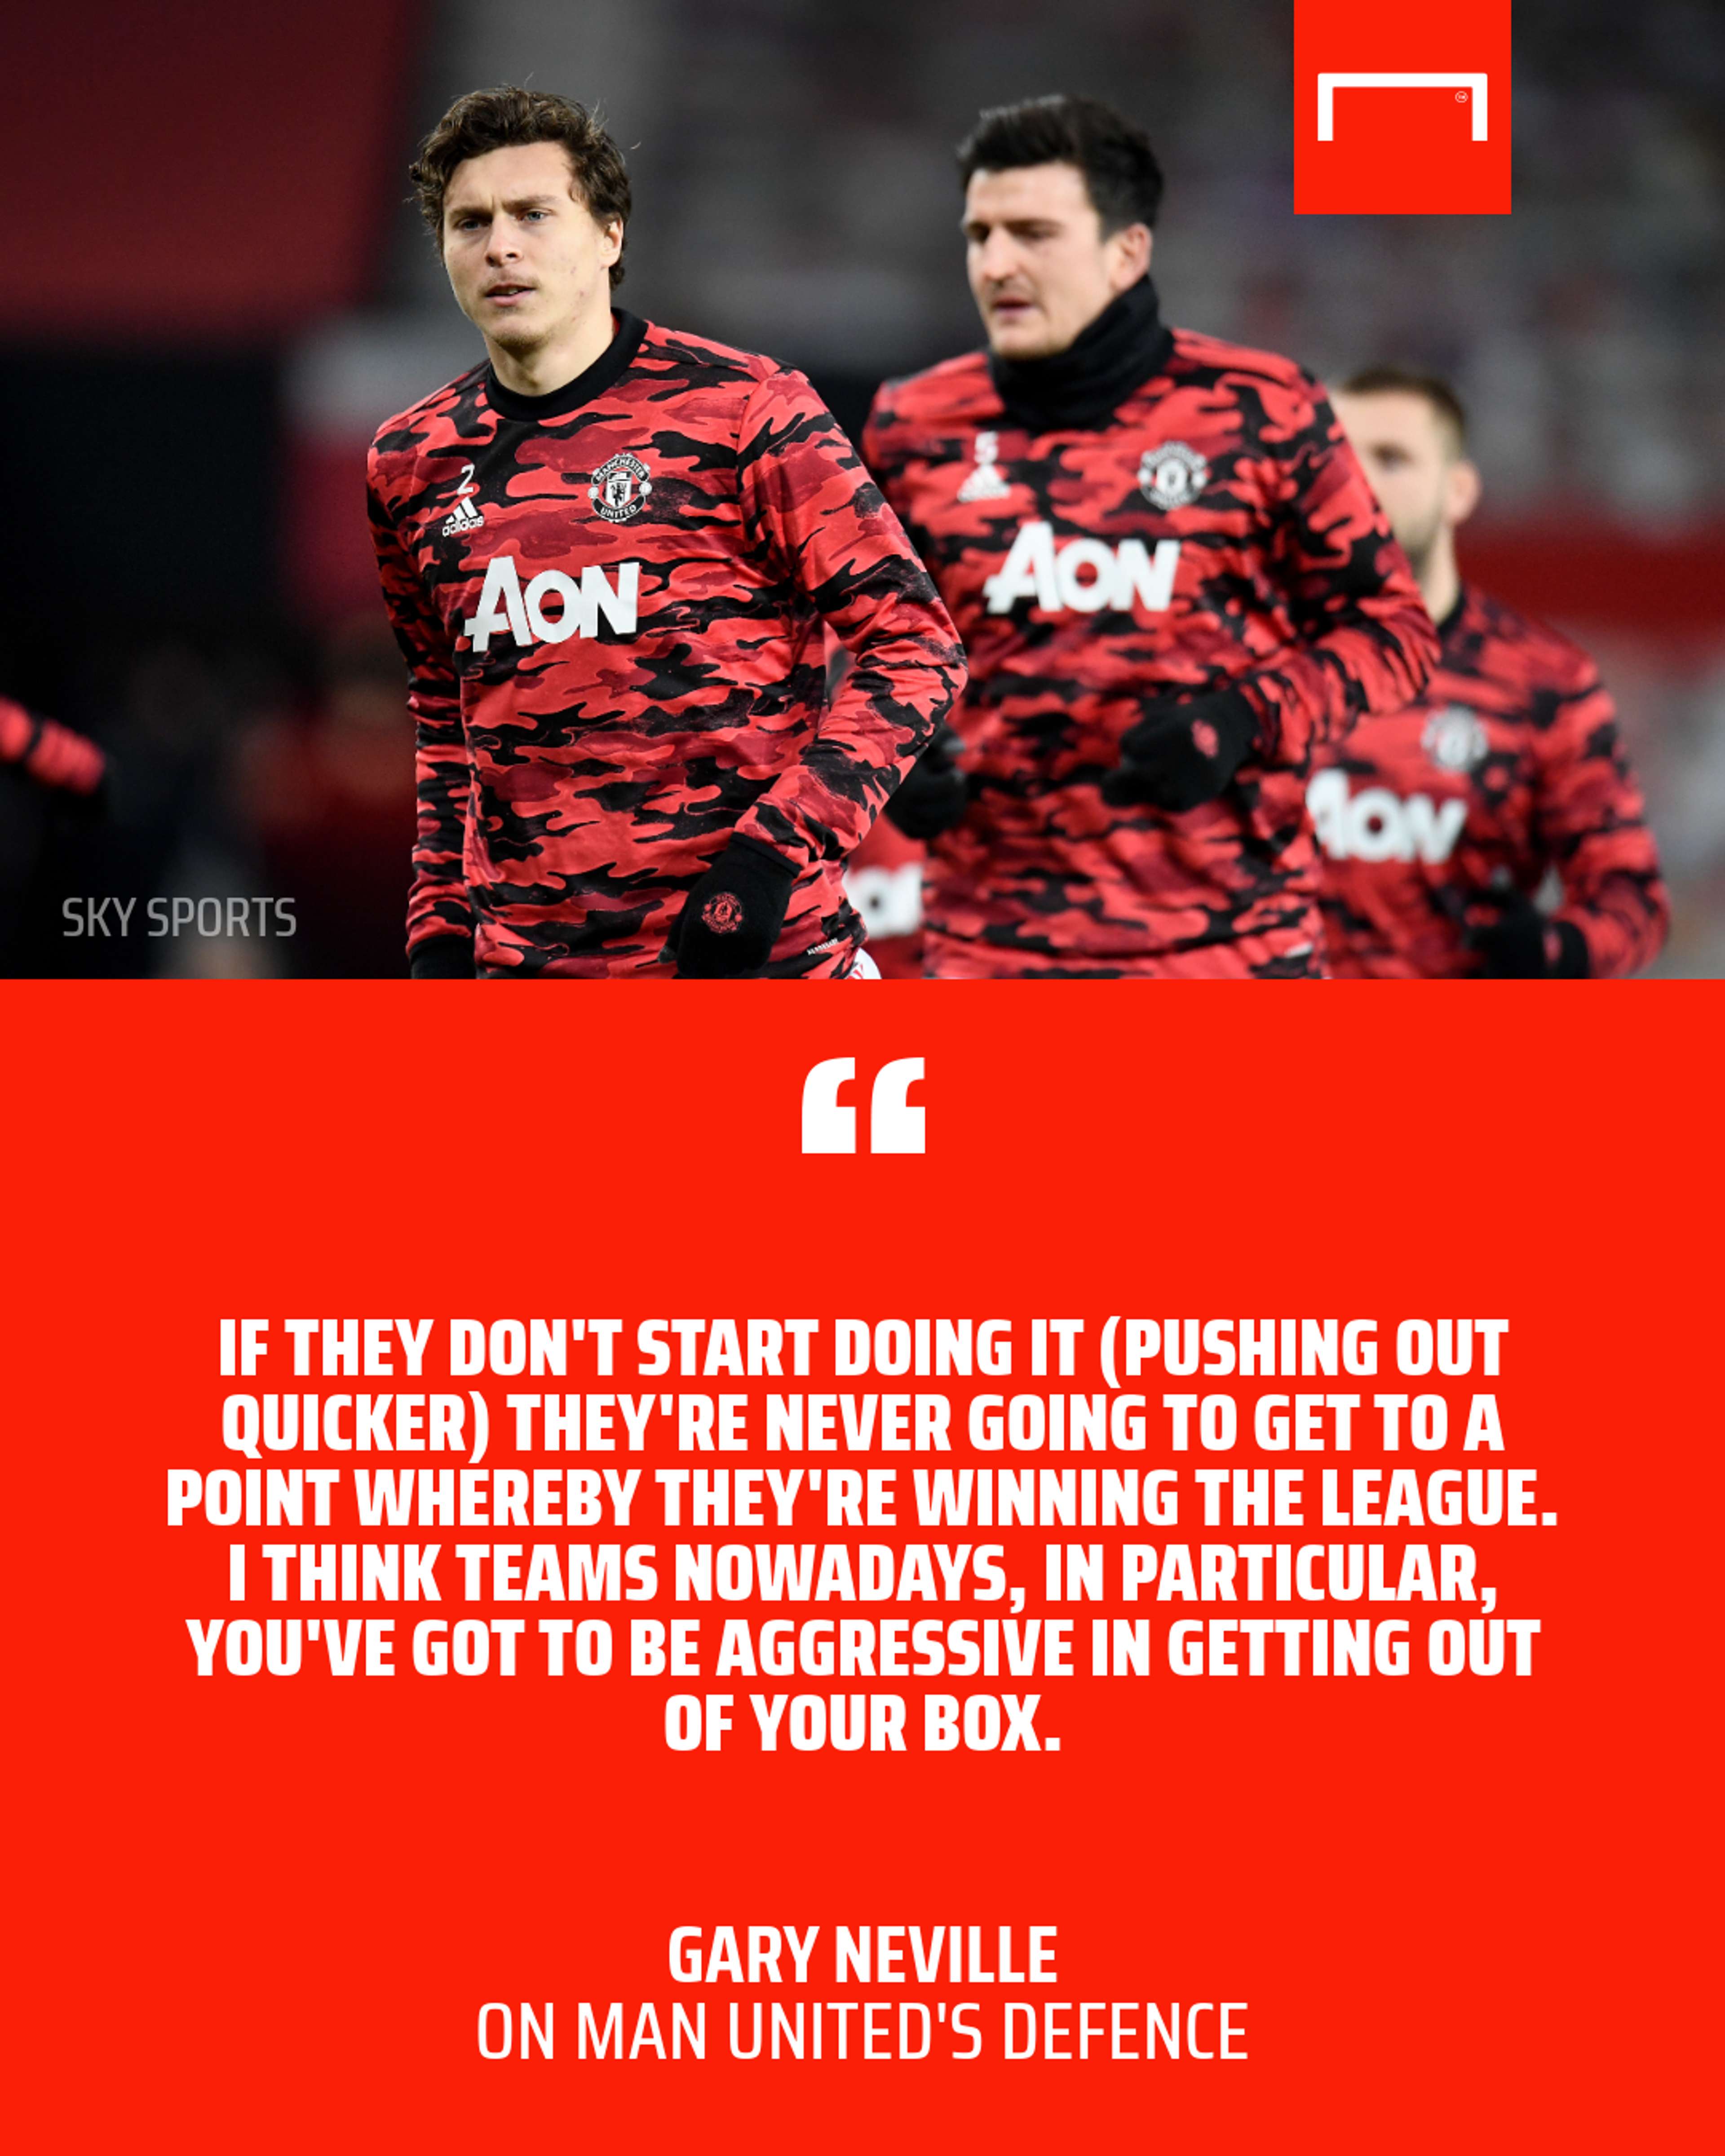 GFX Neville quote on Man United defence